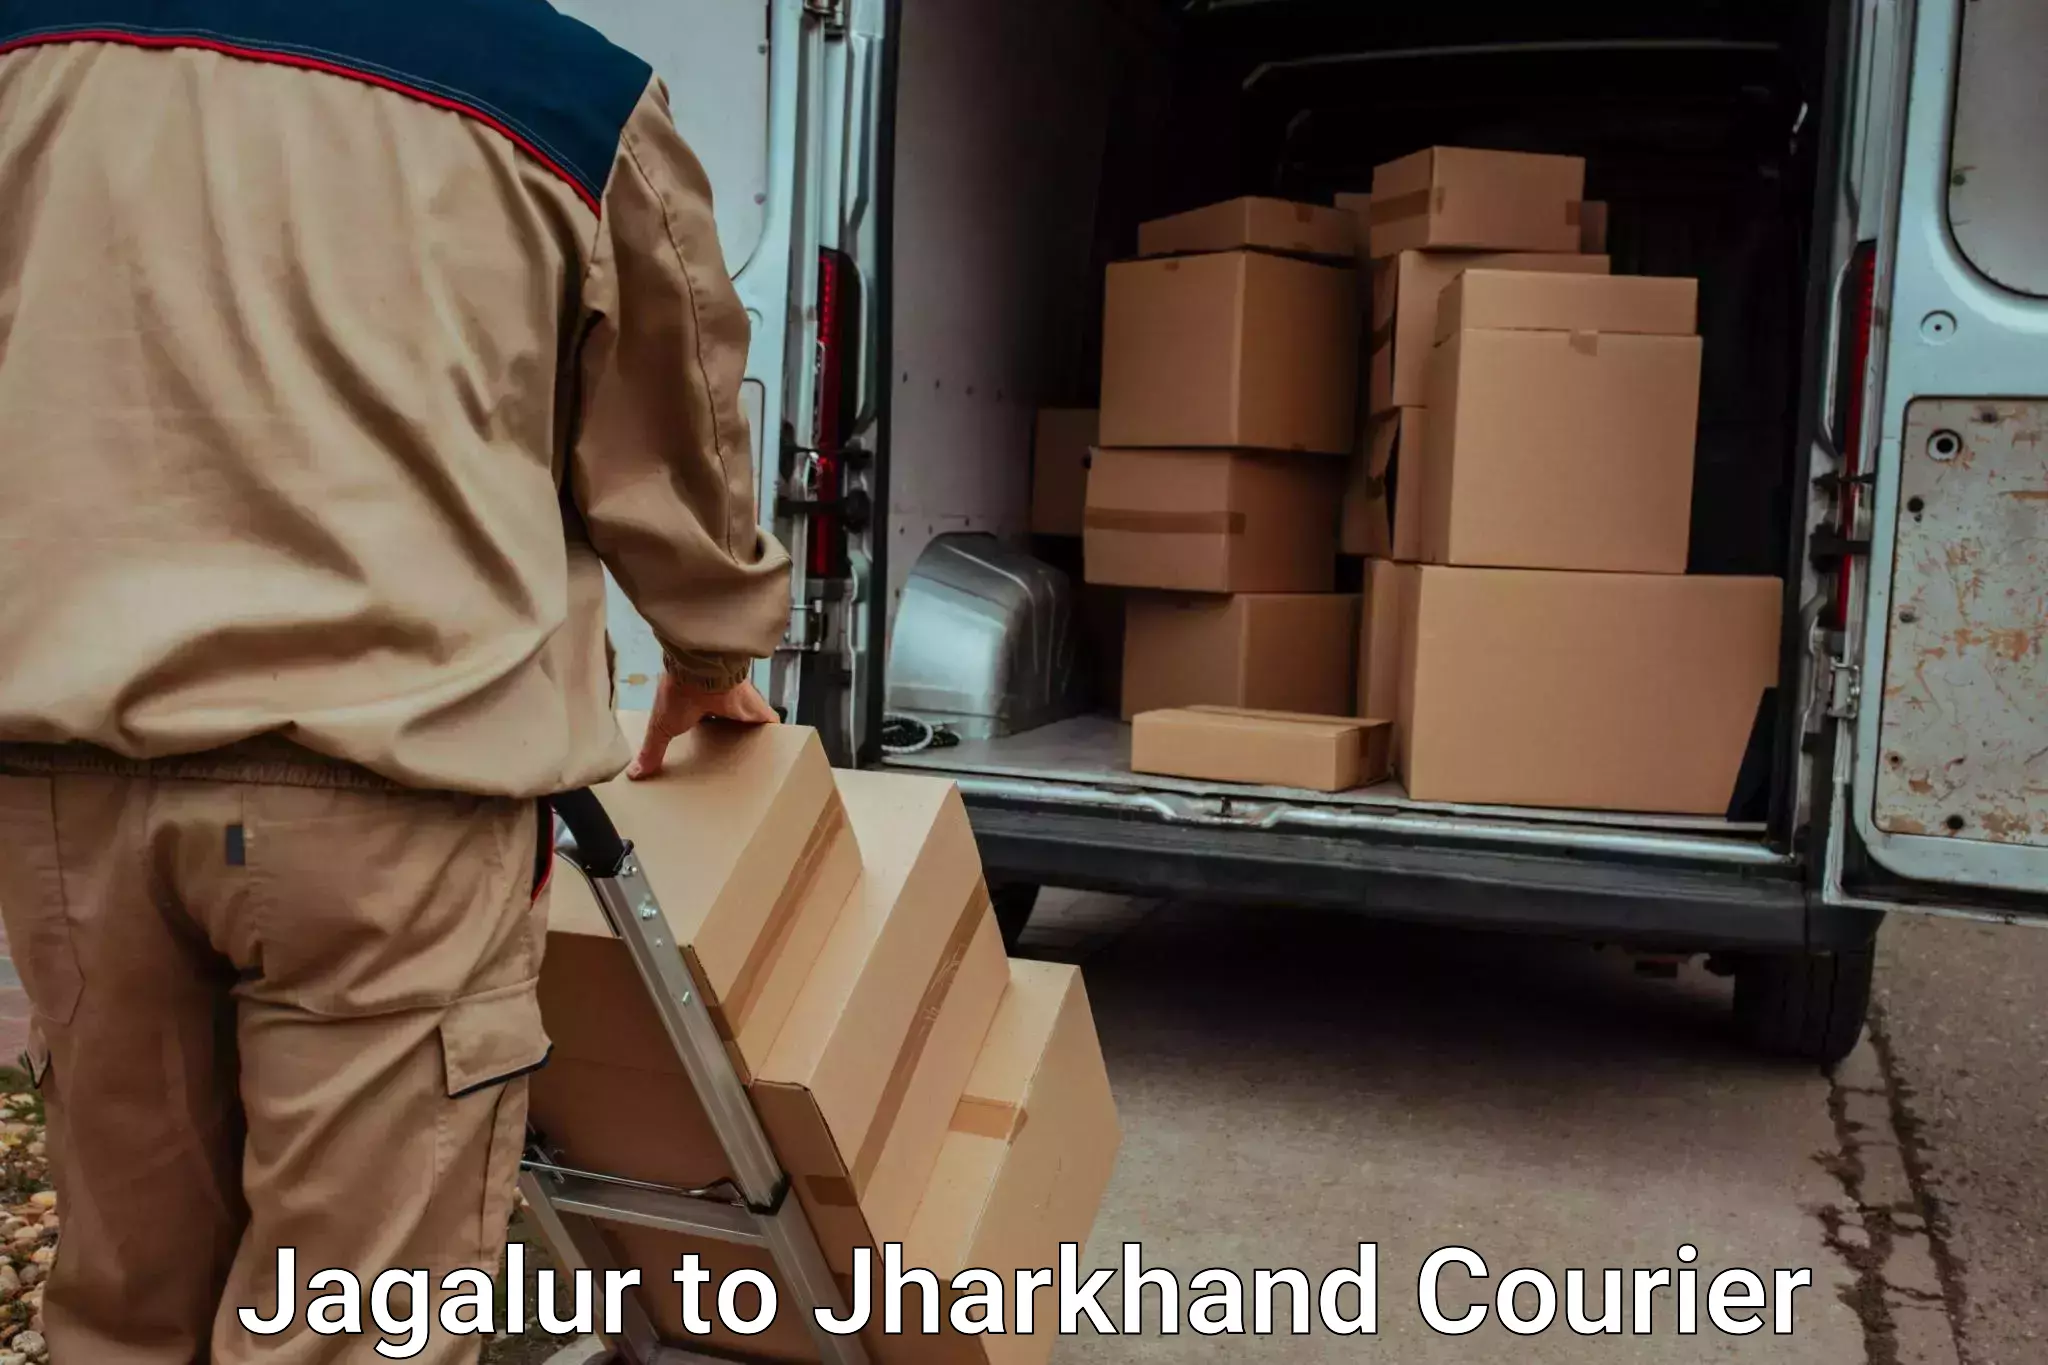 Luggage shipment specialists Jagalur to Jharkhand